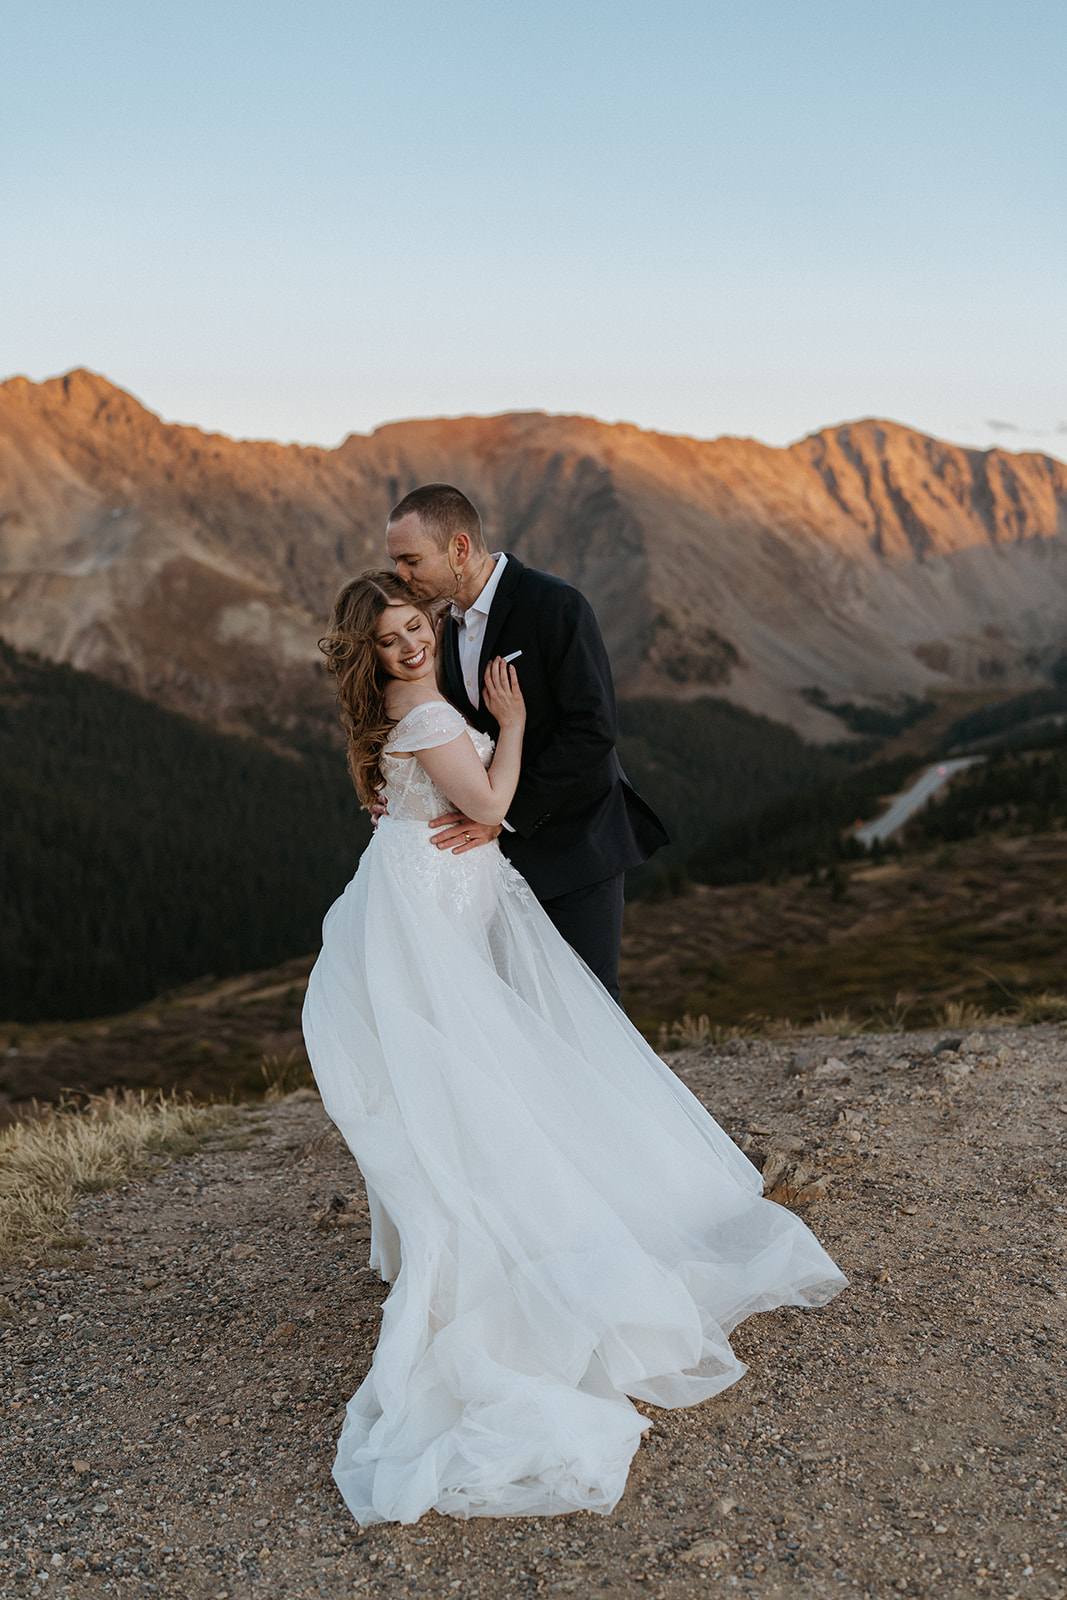 A groom in a black suit kisses the temple of his bride in a lace dress at sunset in the remote mountains